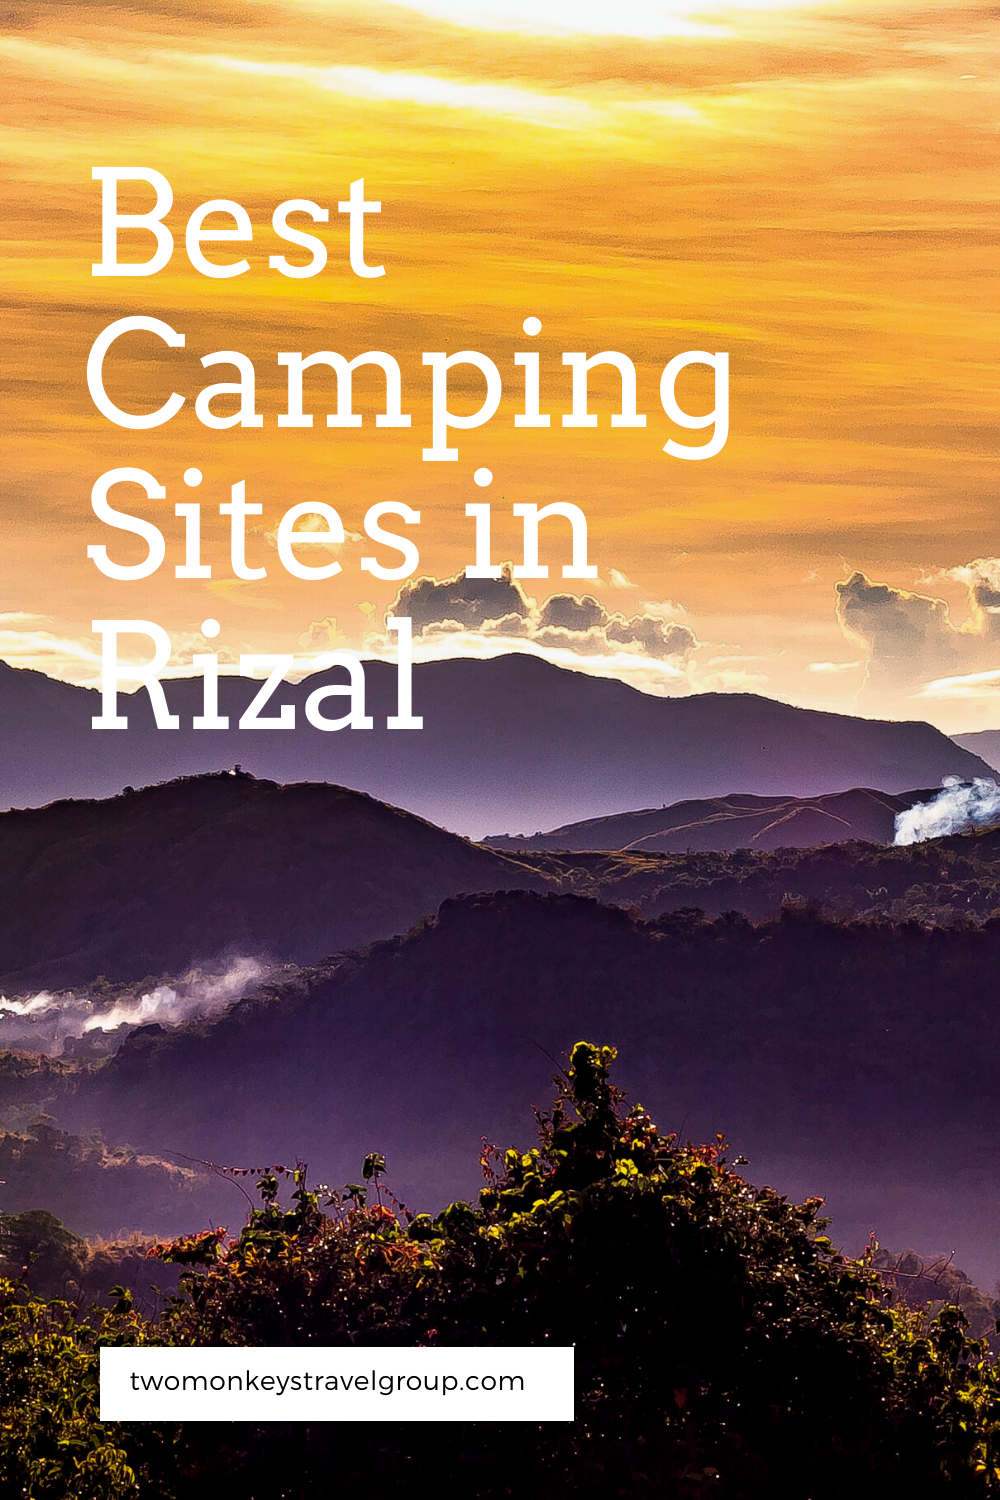 The 5 Best Camping Sites in Rizal